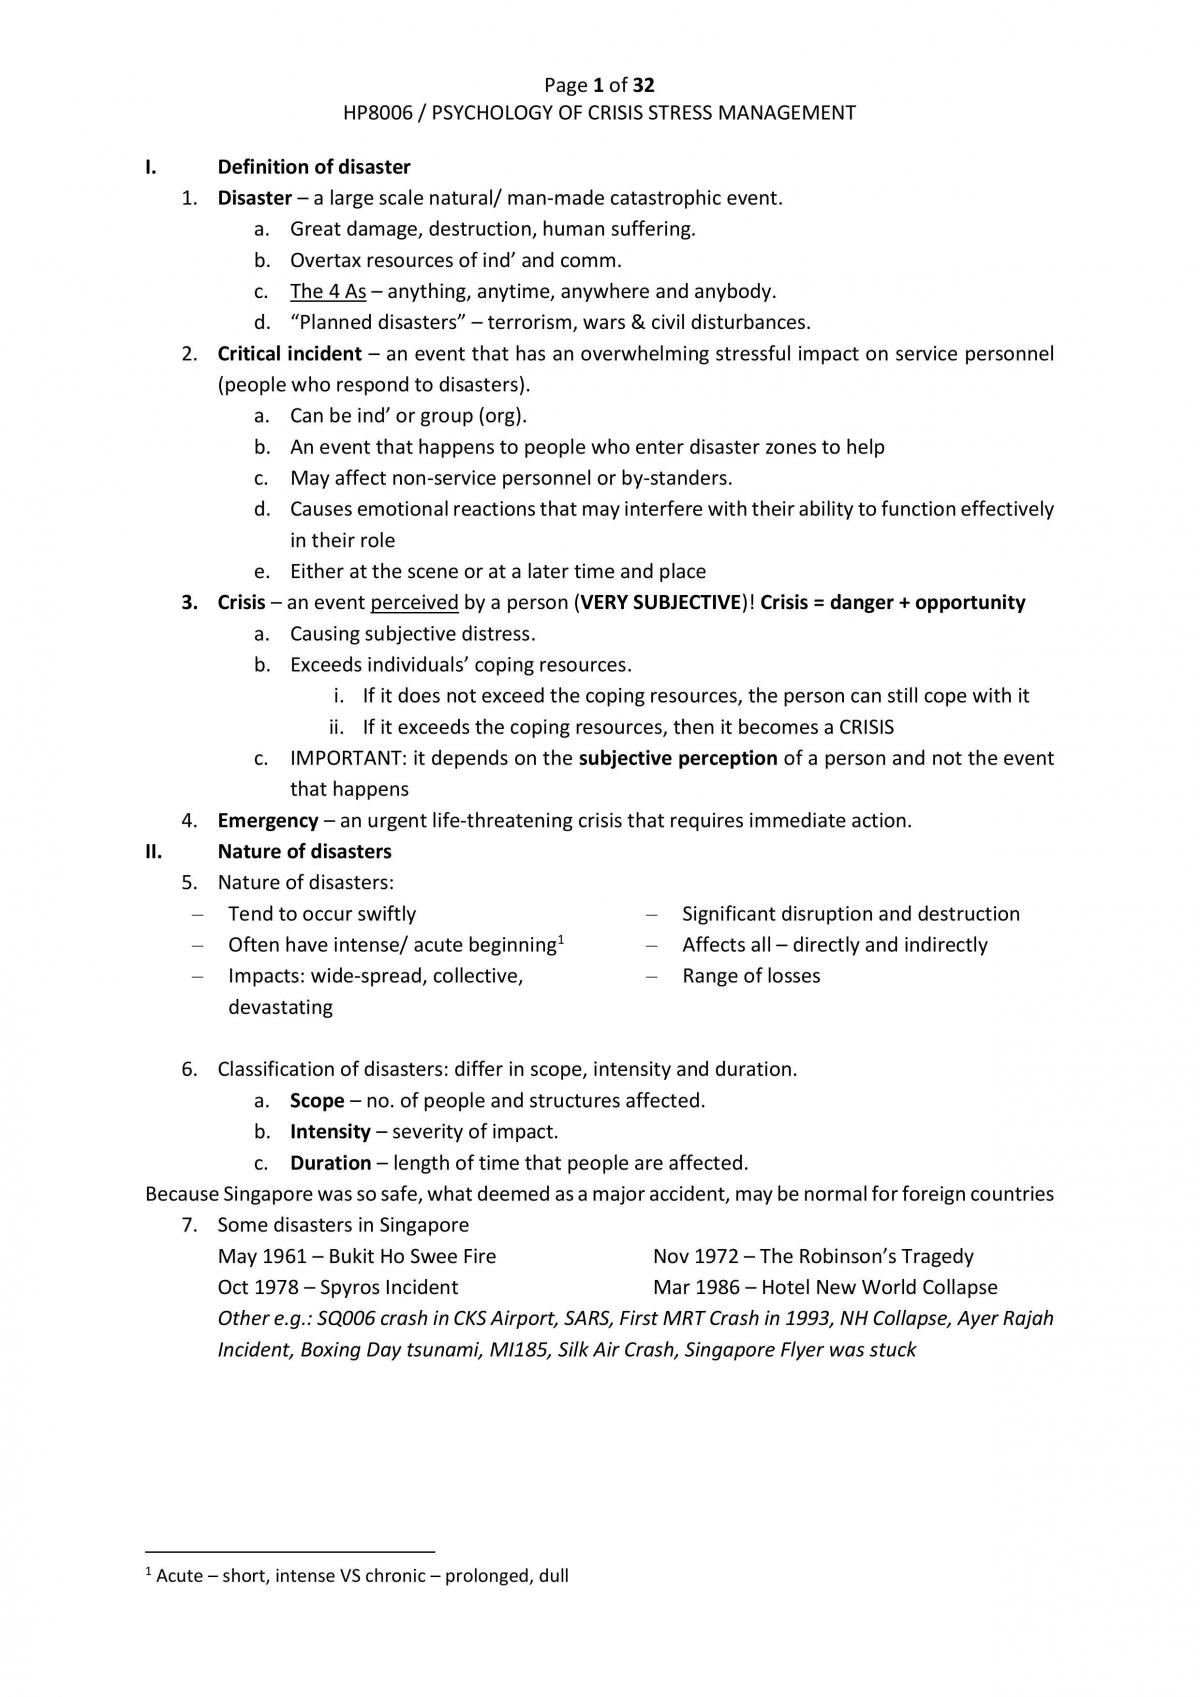 Summary notes for HP8006 - Page 1